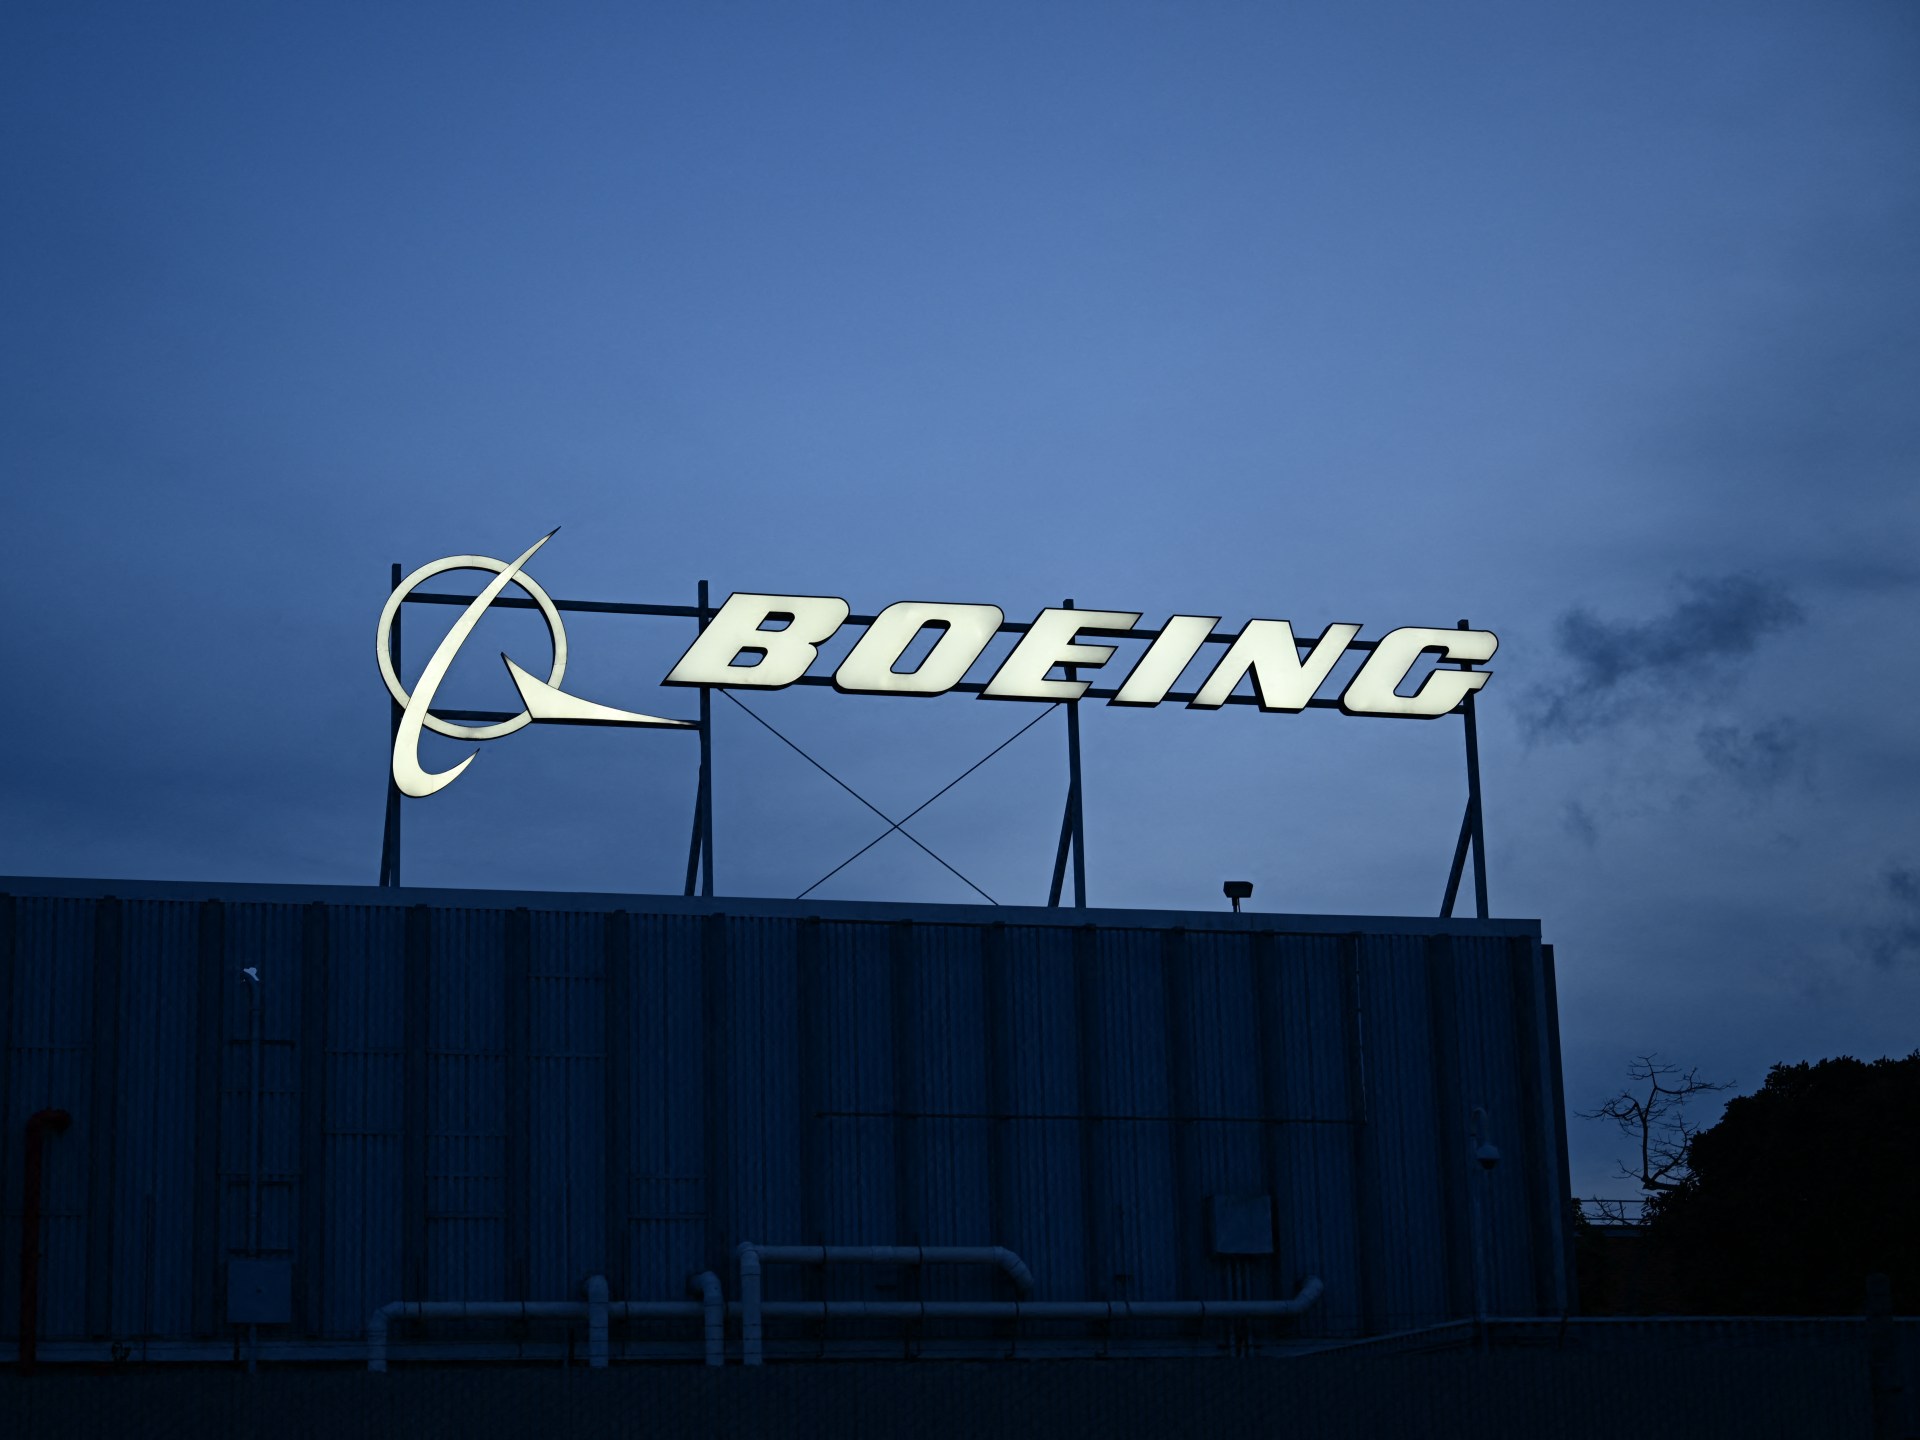 Poor quality control, race for profits behind Boeing’s troubles | Aviation News